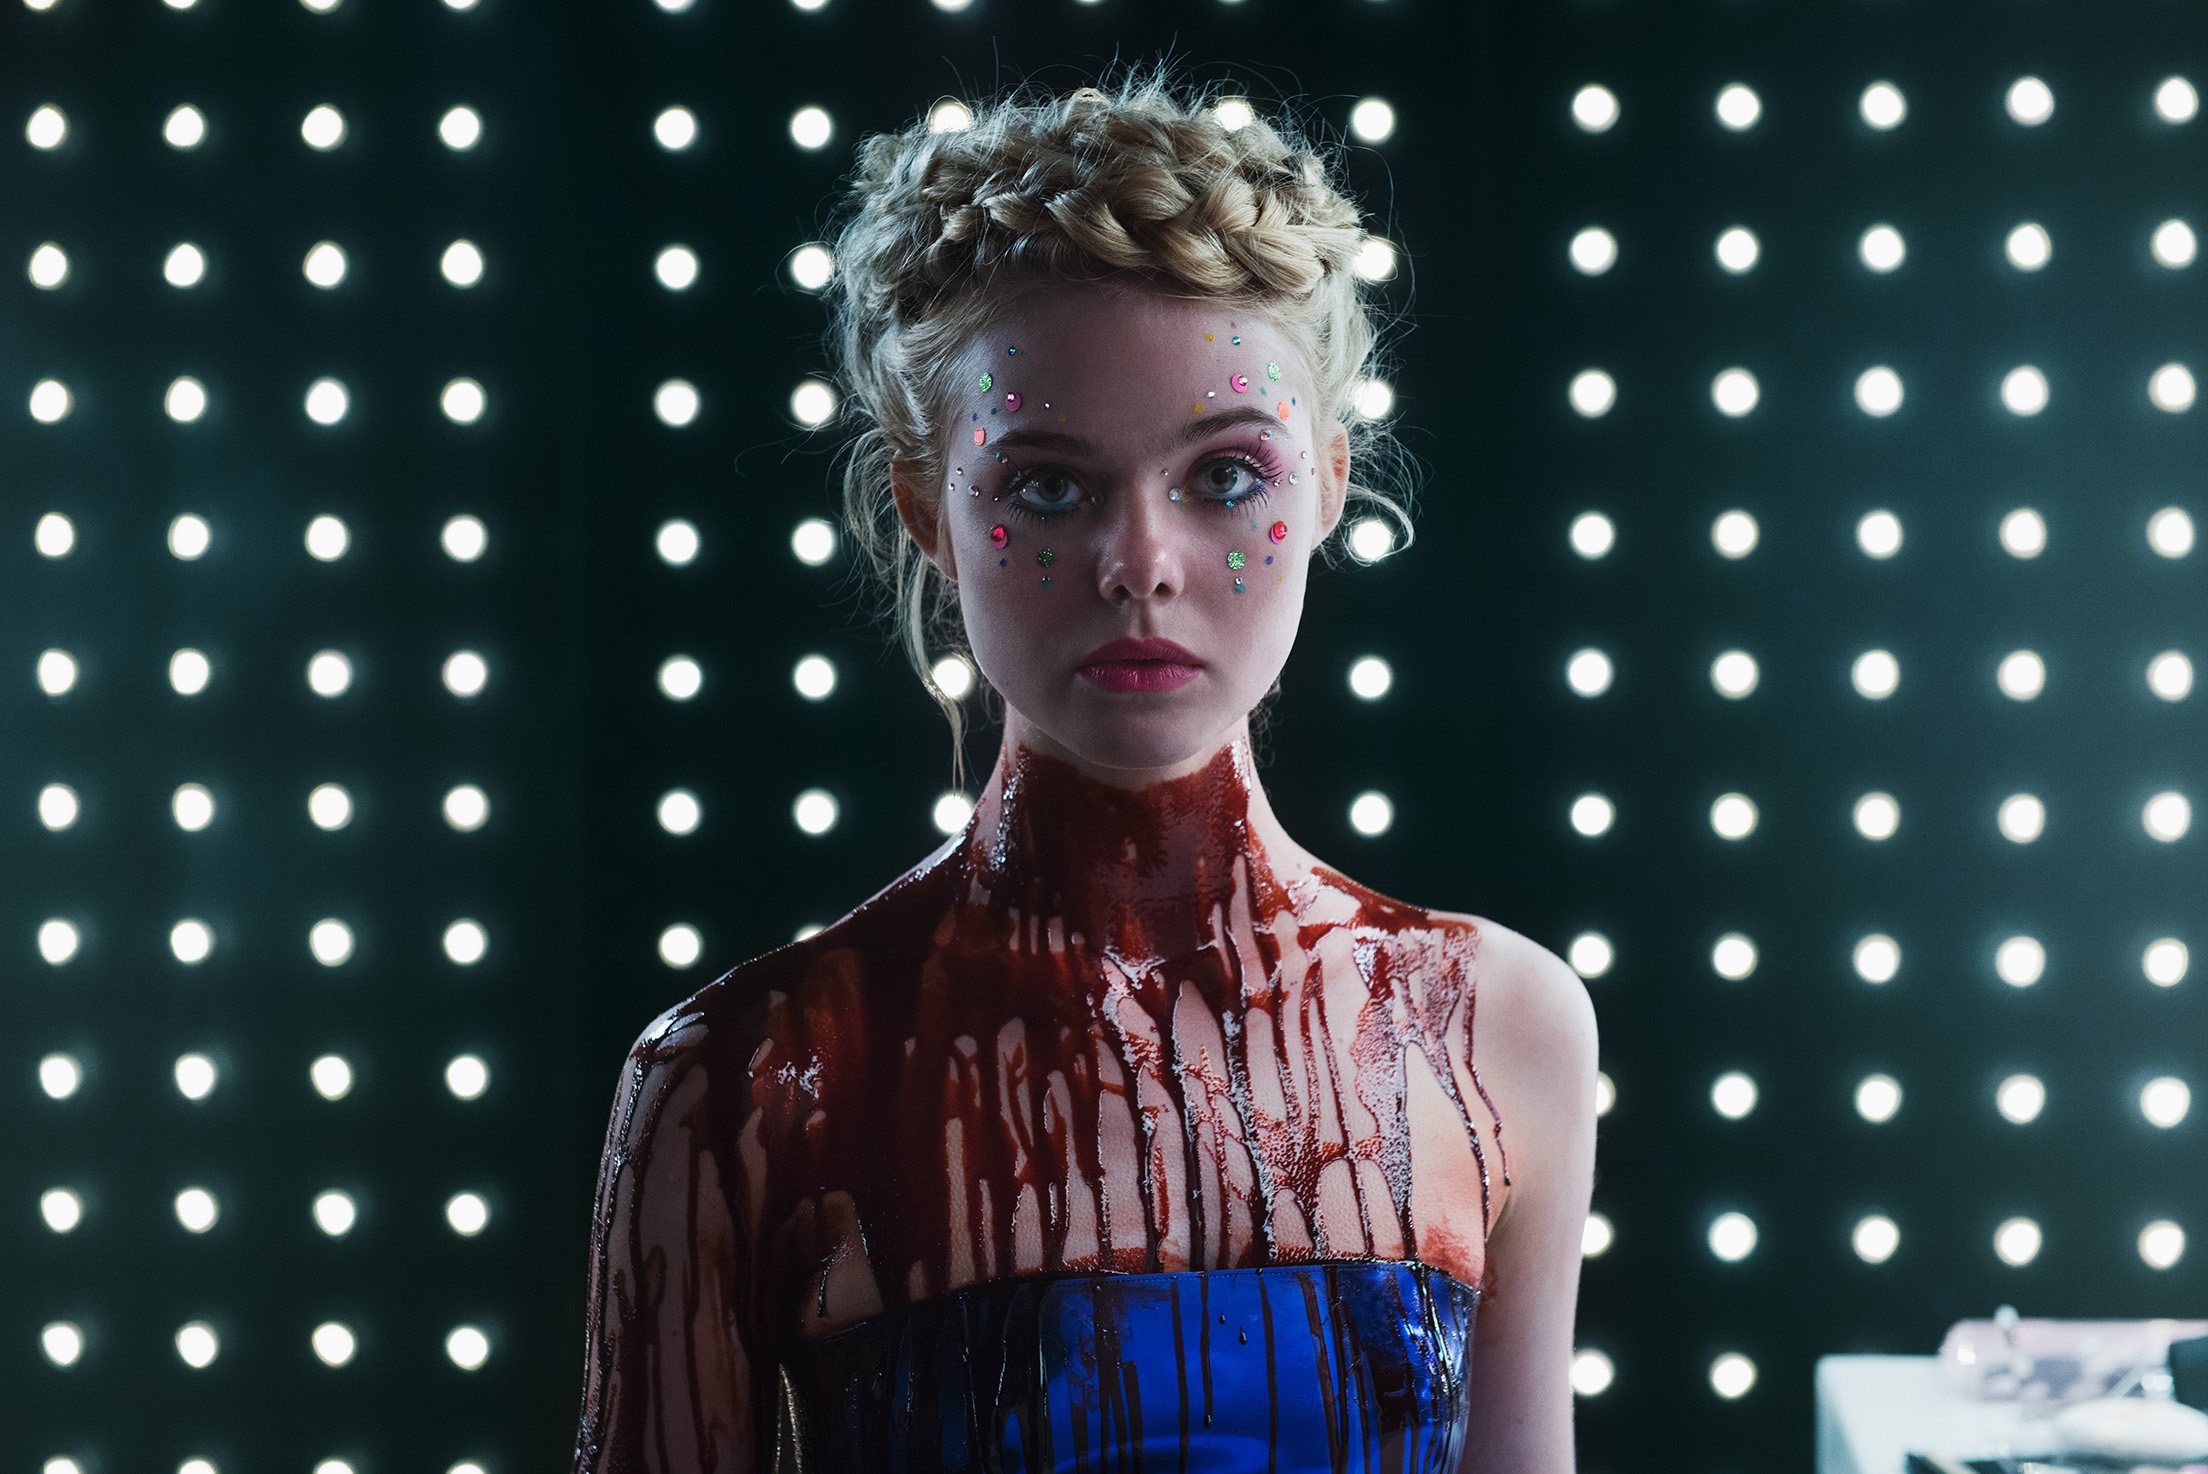 Jesse (Elle Fanning) stands looking at the camera, her face decorated with jewels, and blood covering her neck and chest, in 'Neon Demon.'